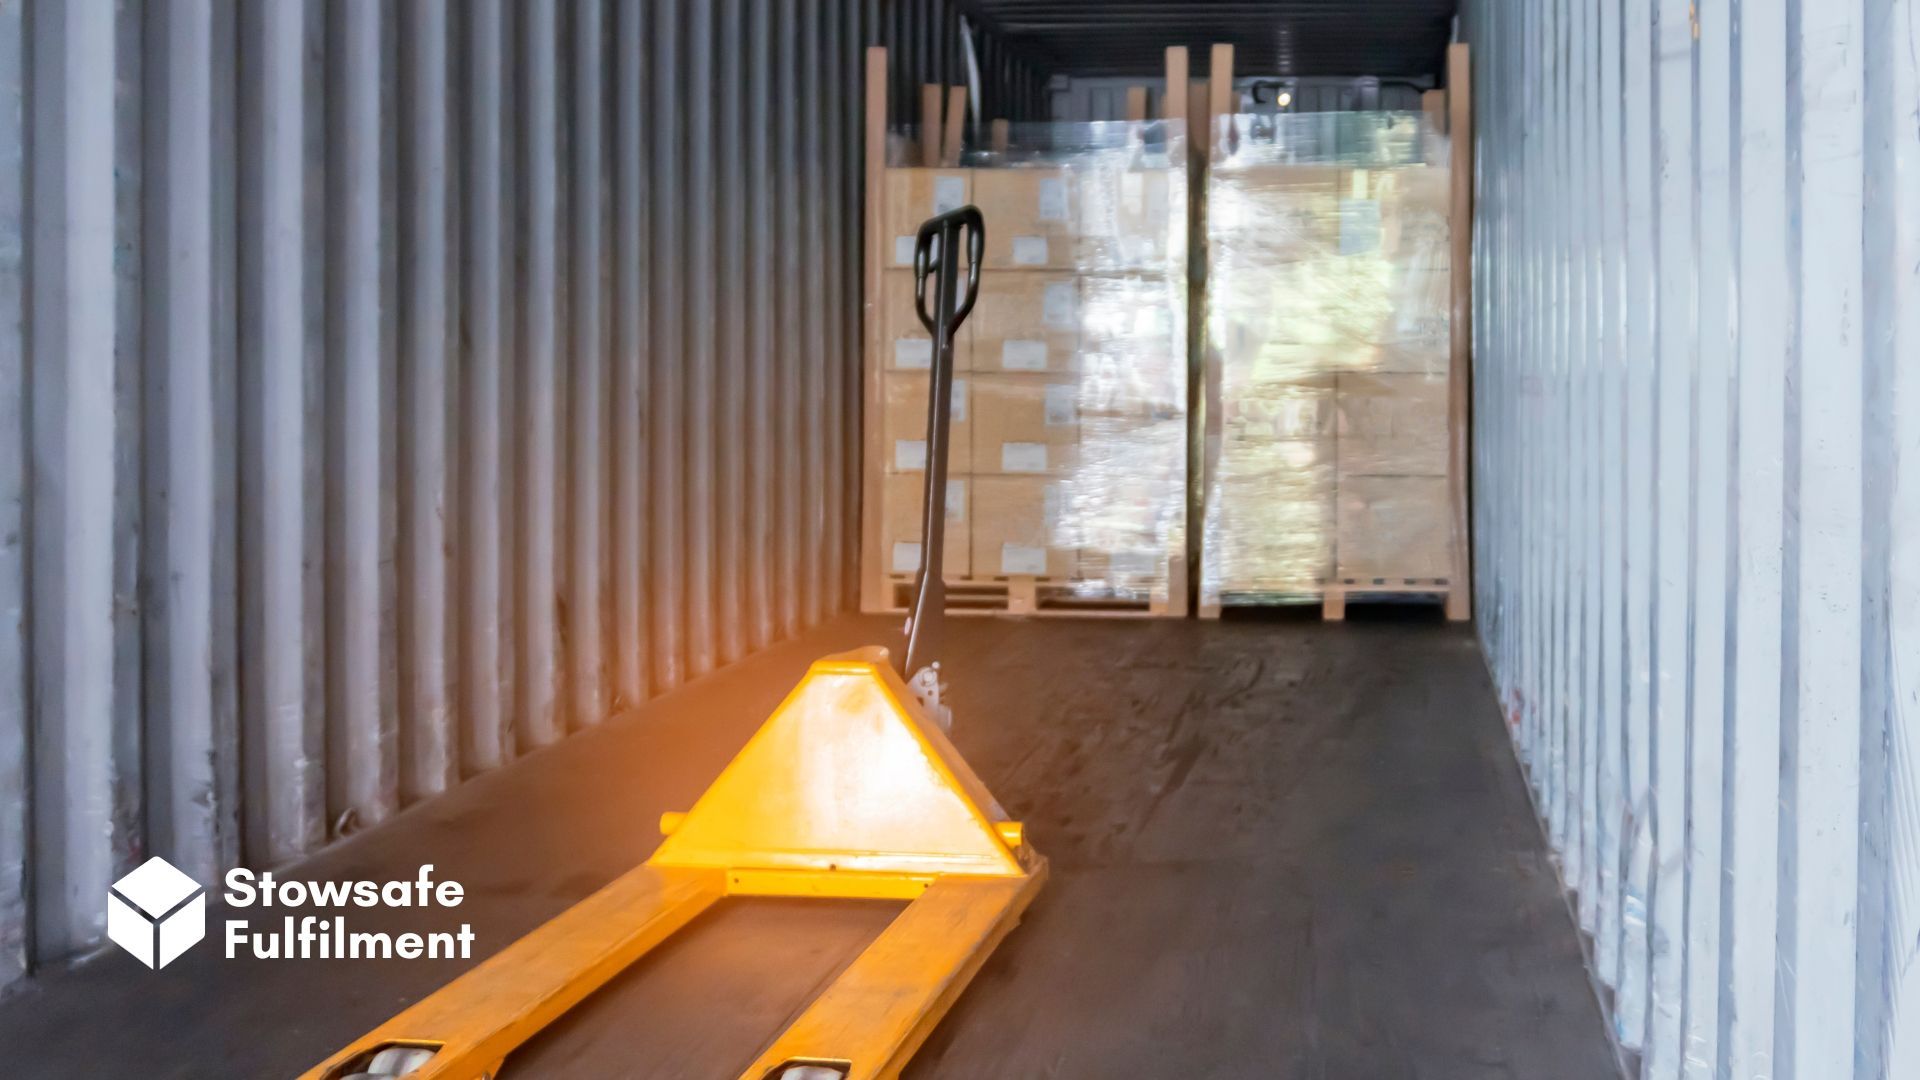 Container devanning is an essential part of the supply chain that gets your goods to your customers' doors. Discover what it means and why you need it.
